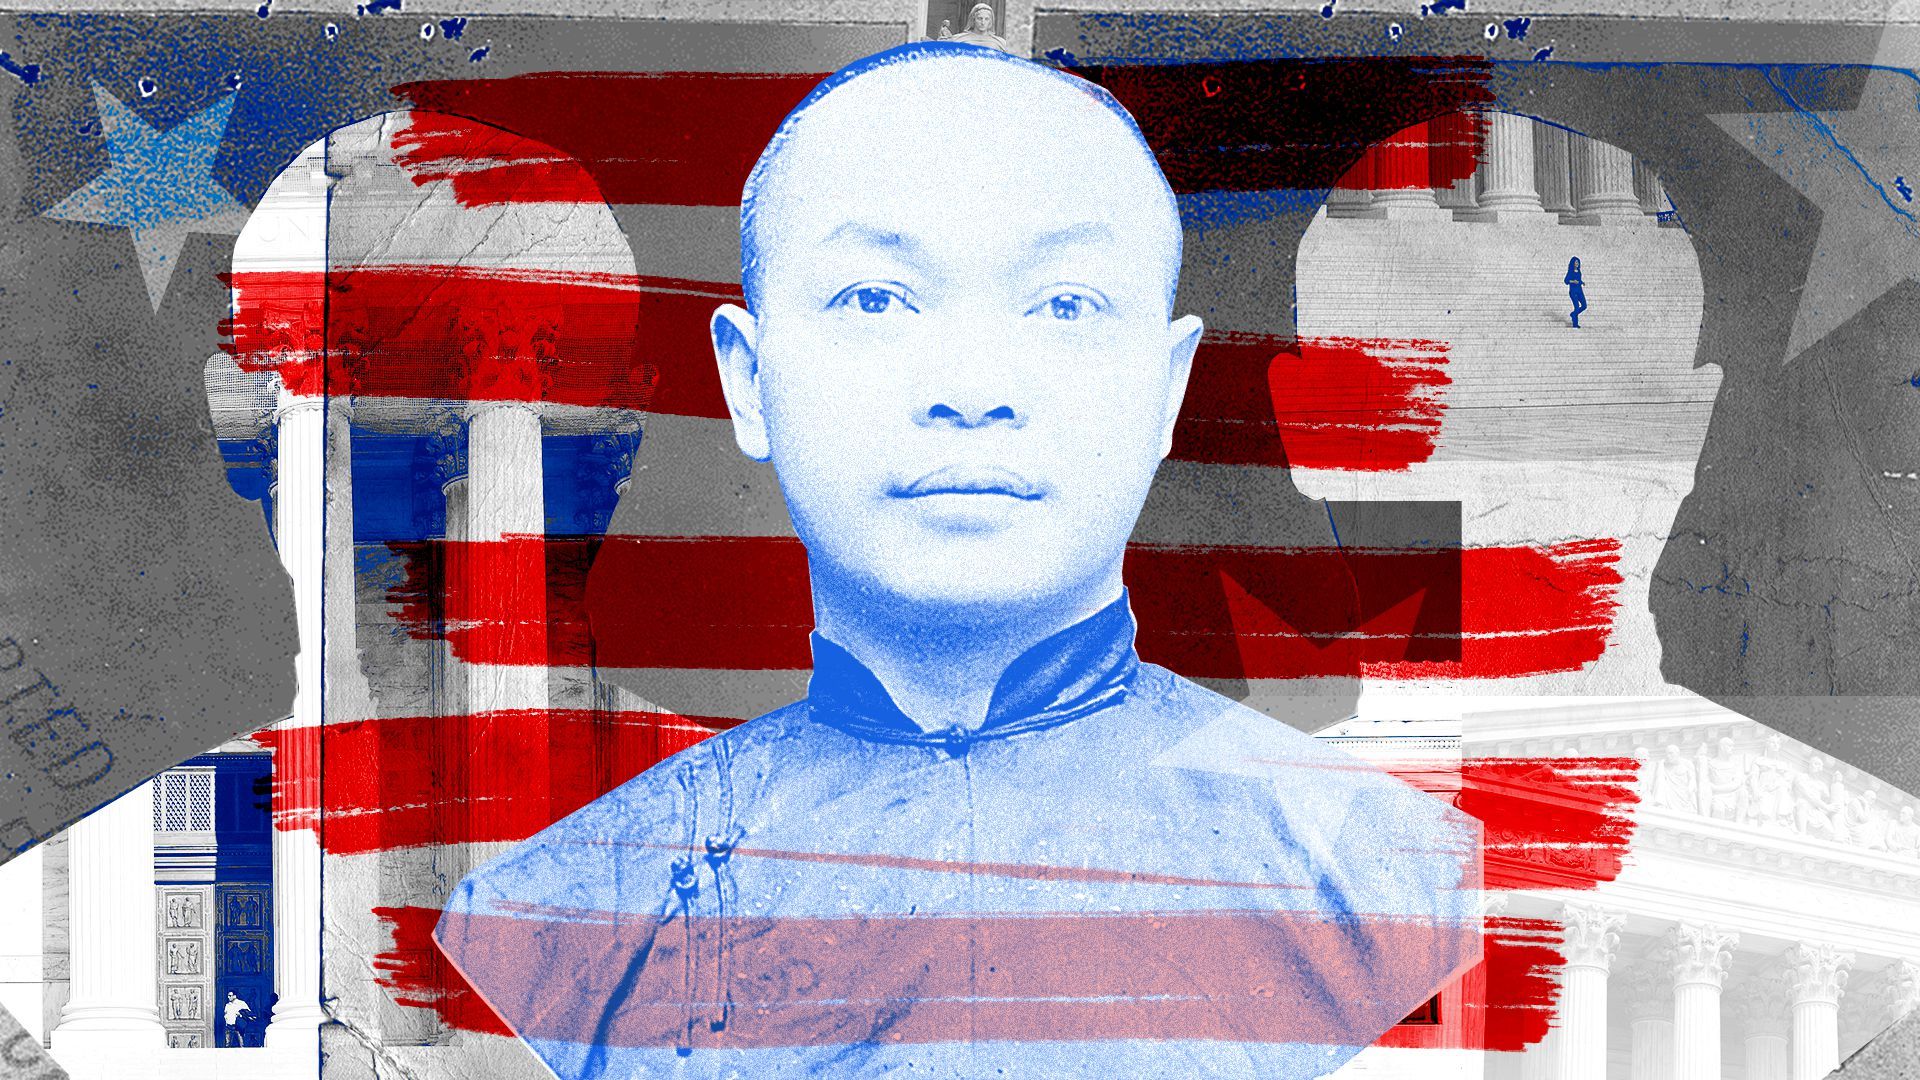 Asian High School - The 1898 moment: How Asian American activism transformed the U.S.